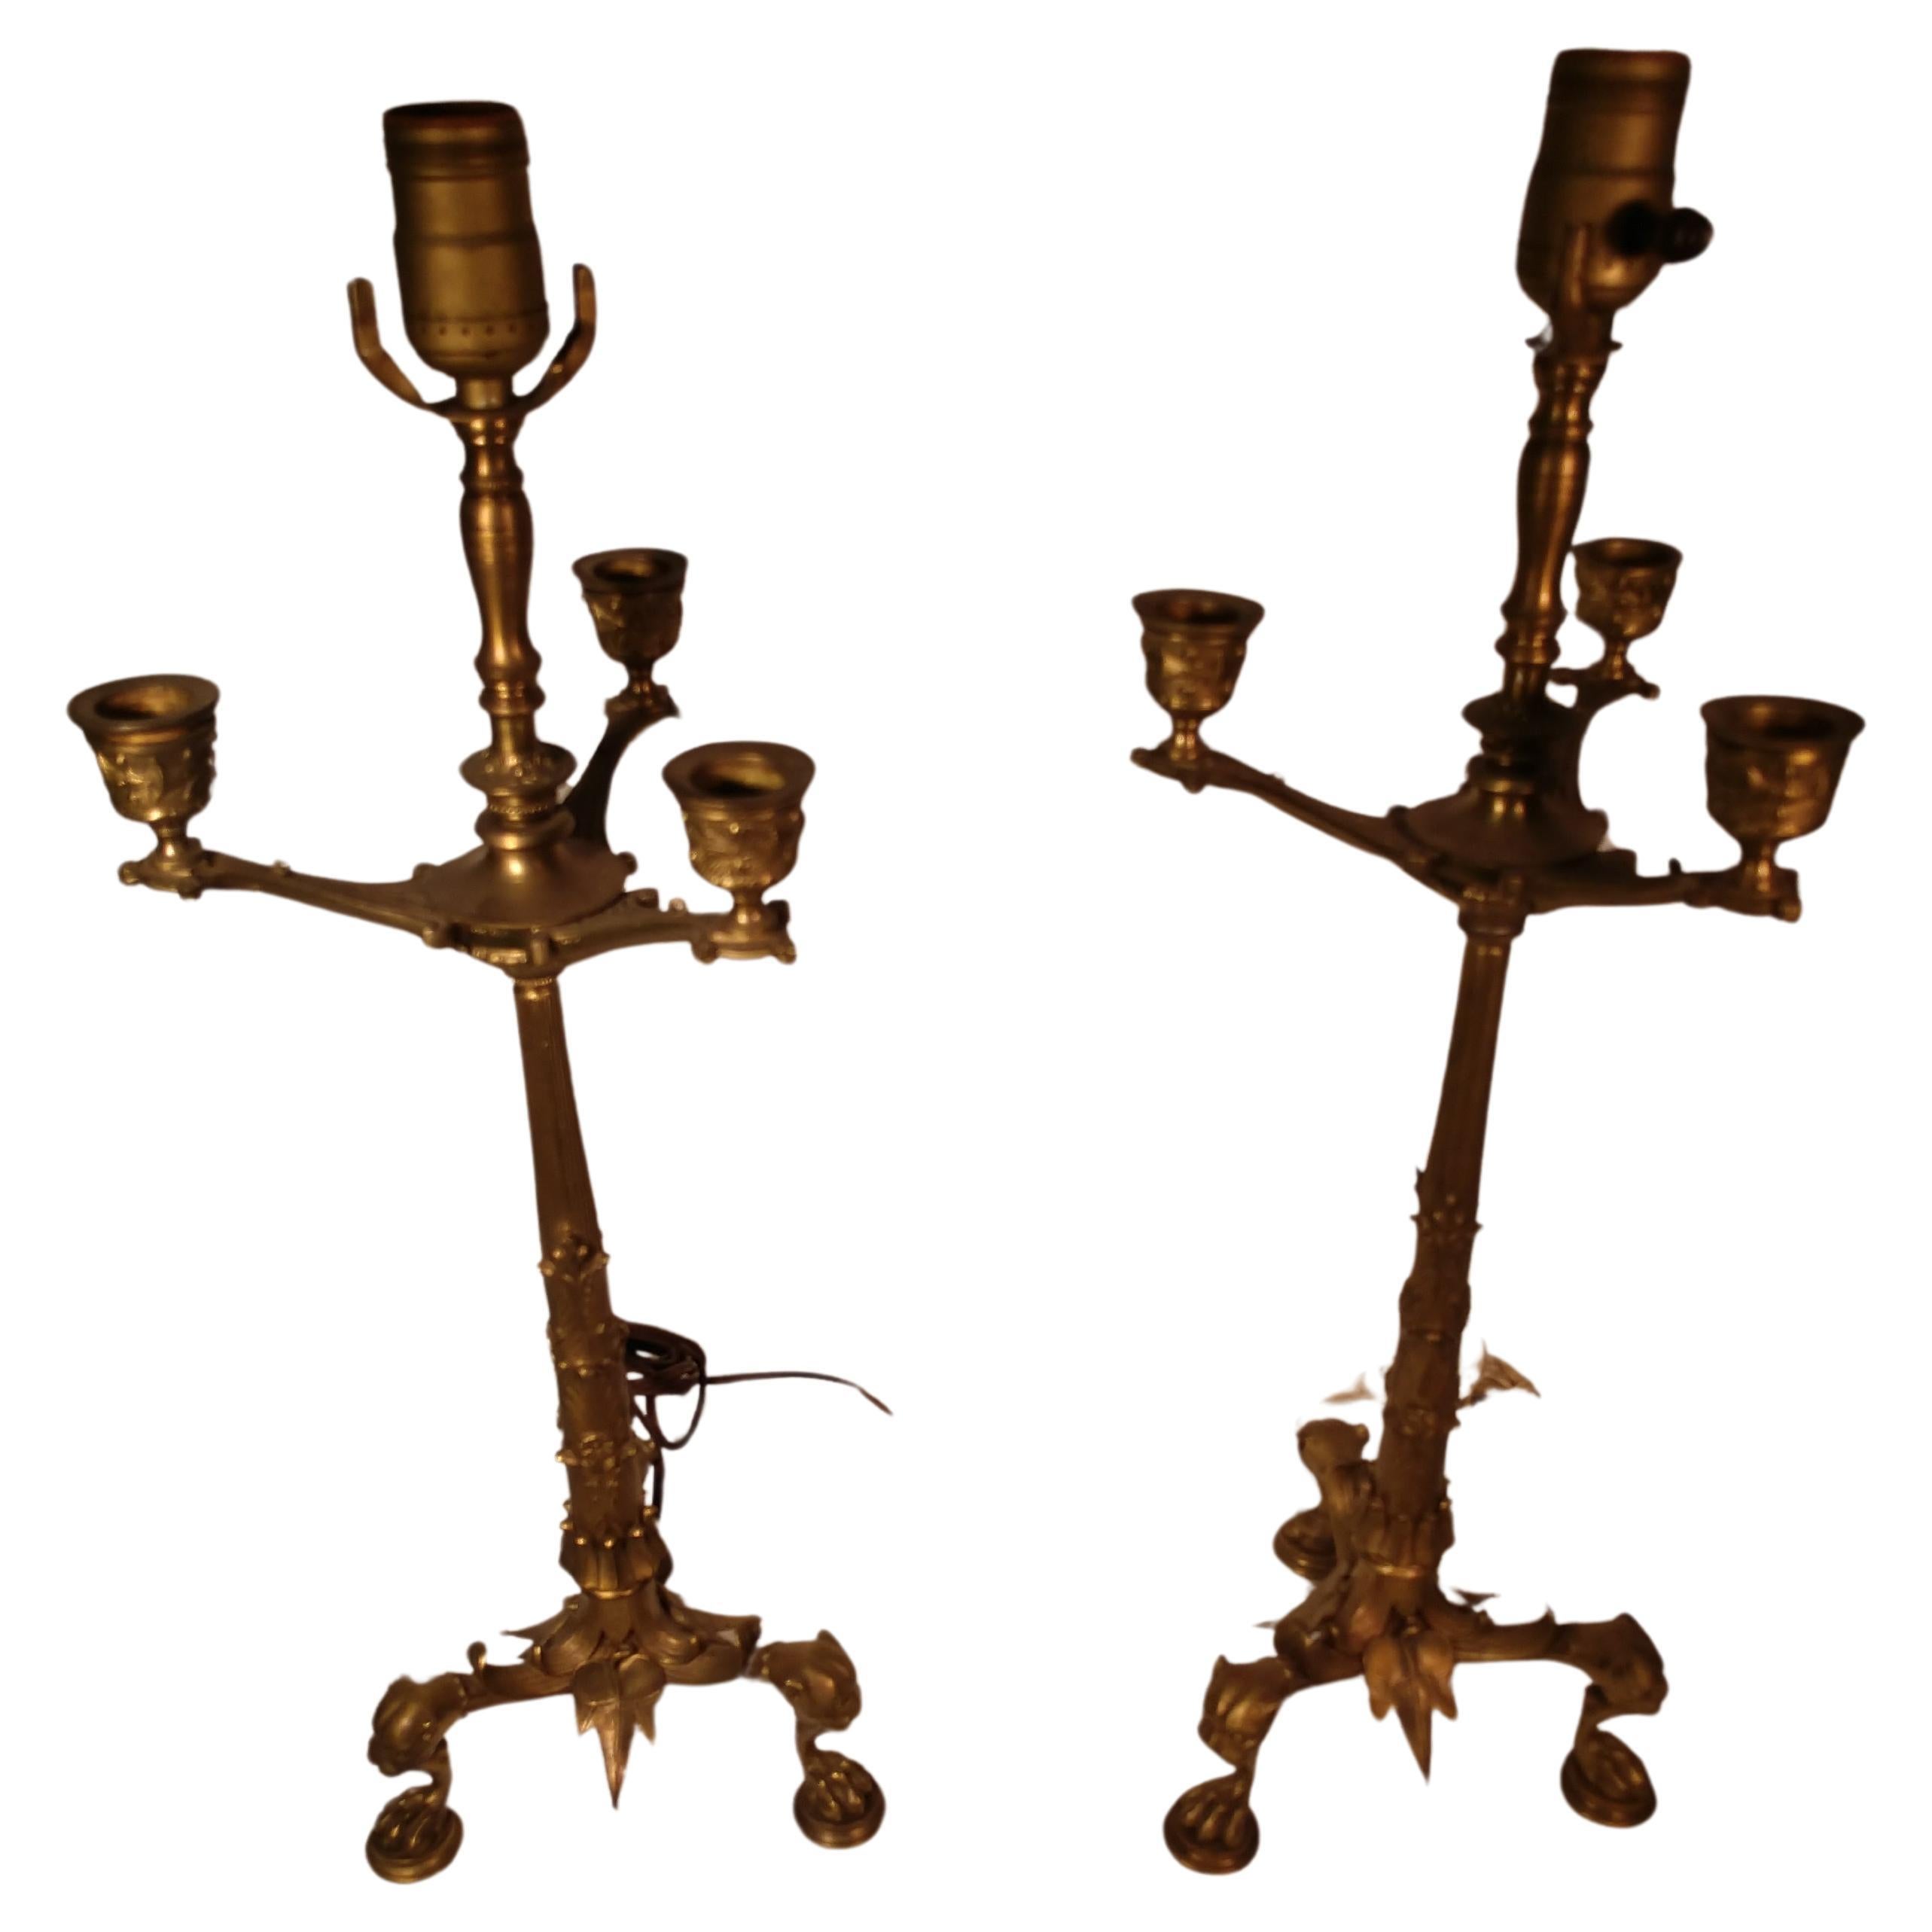 Pair of 19th Century Brass Baroque Candelabra Table Lamps with Lions Heads